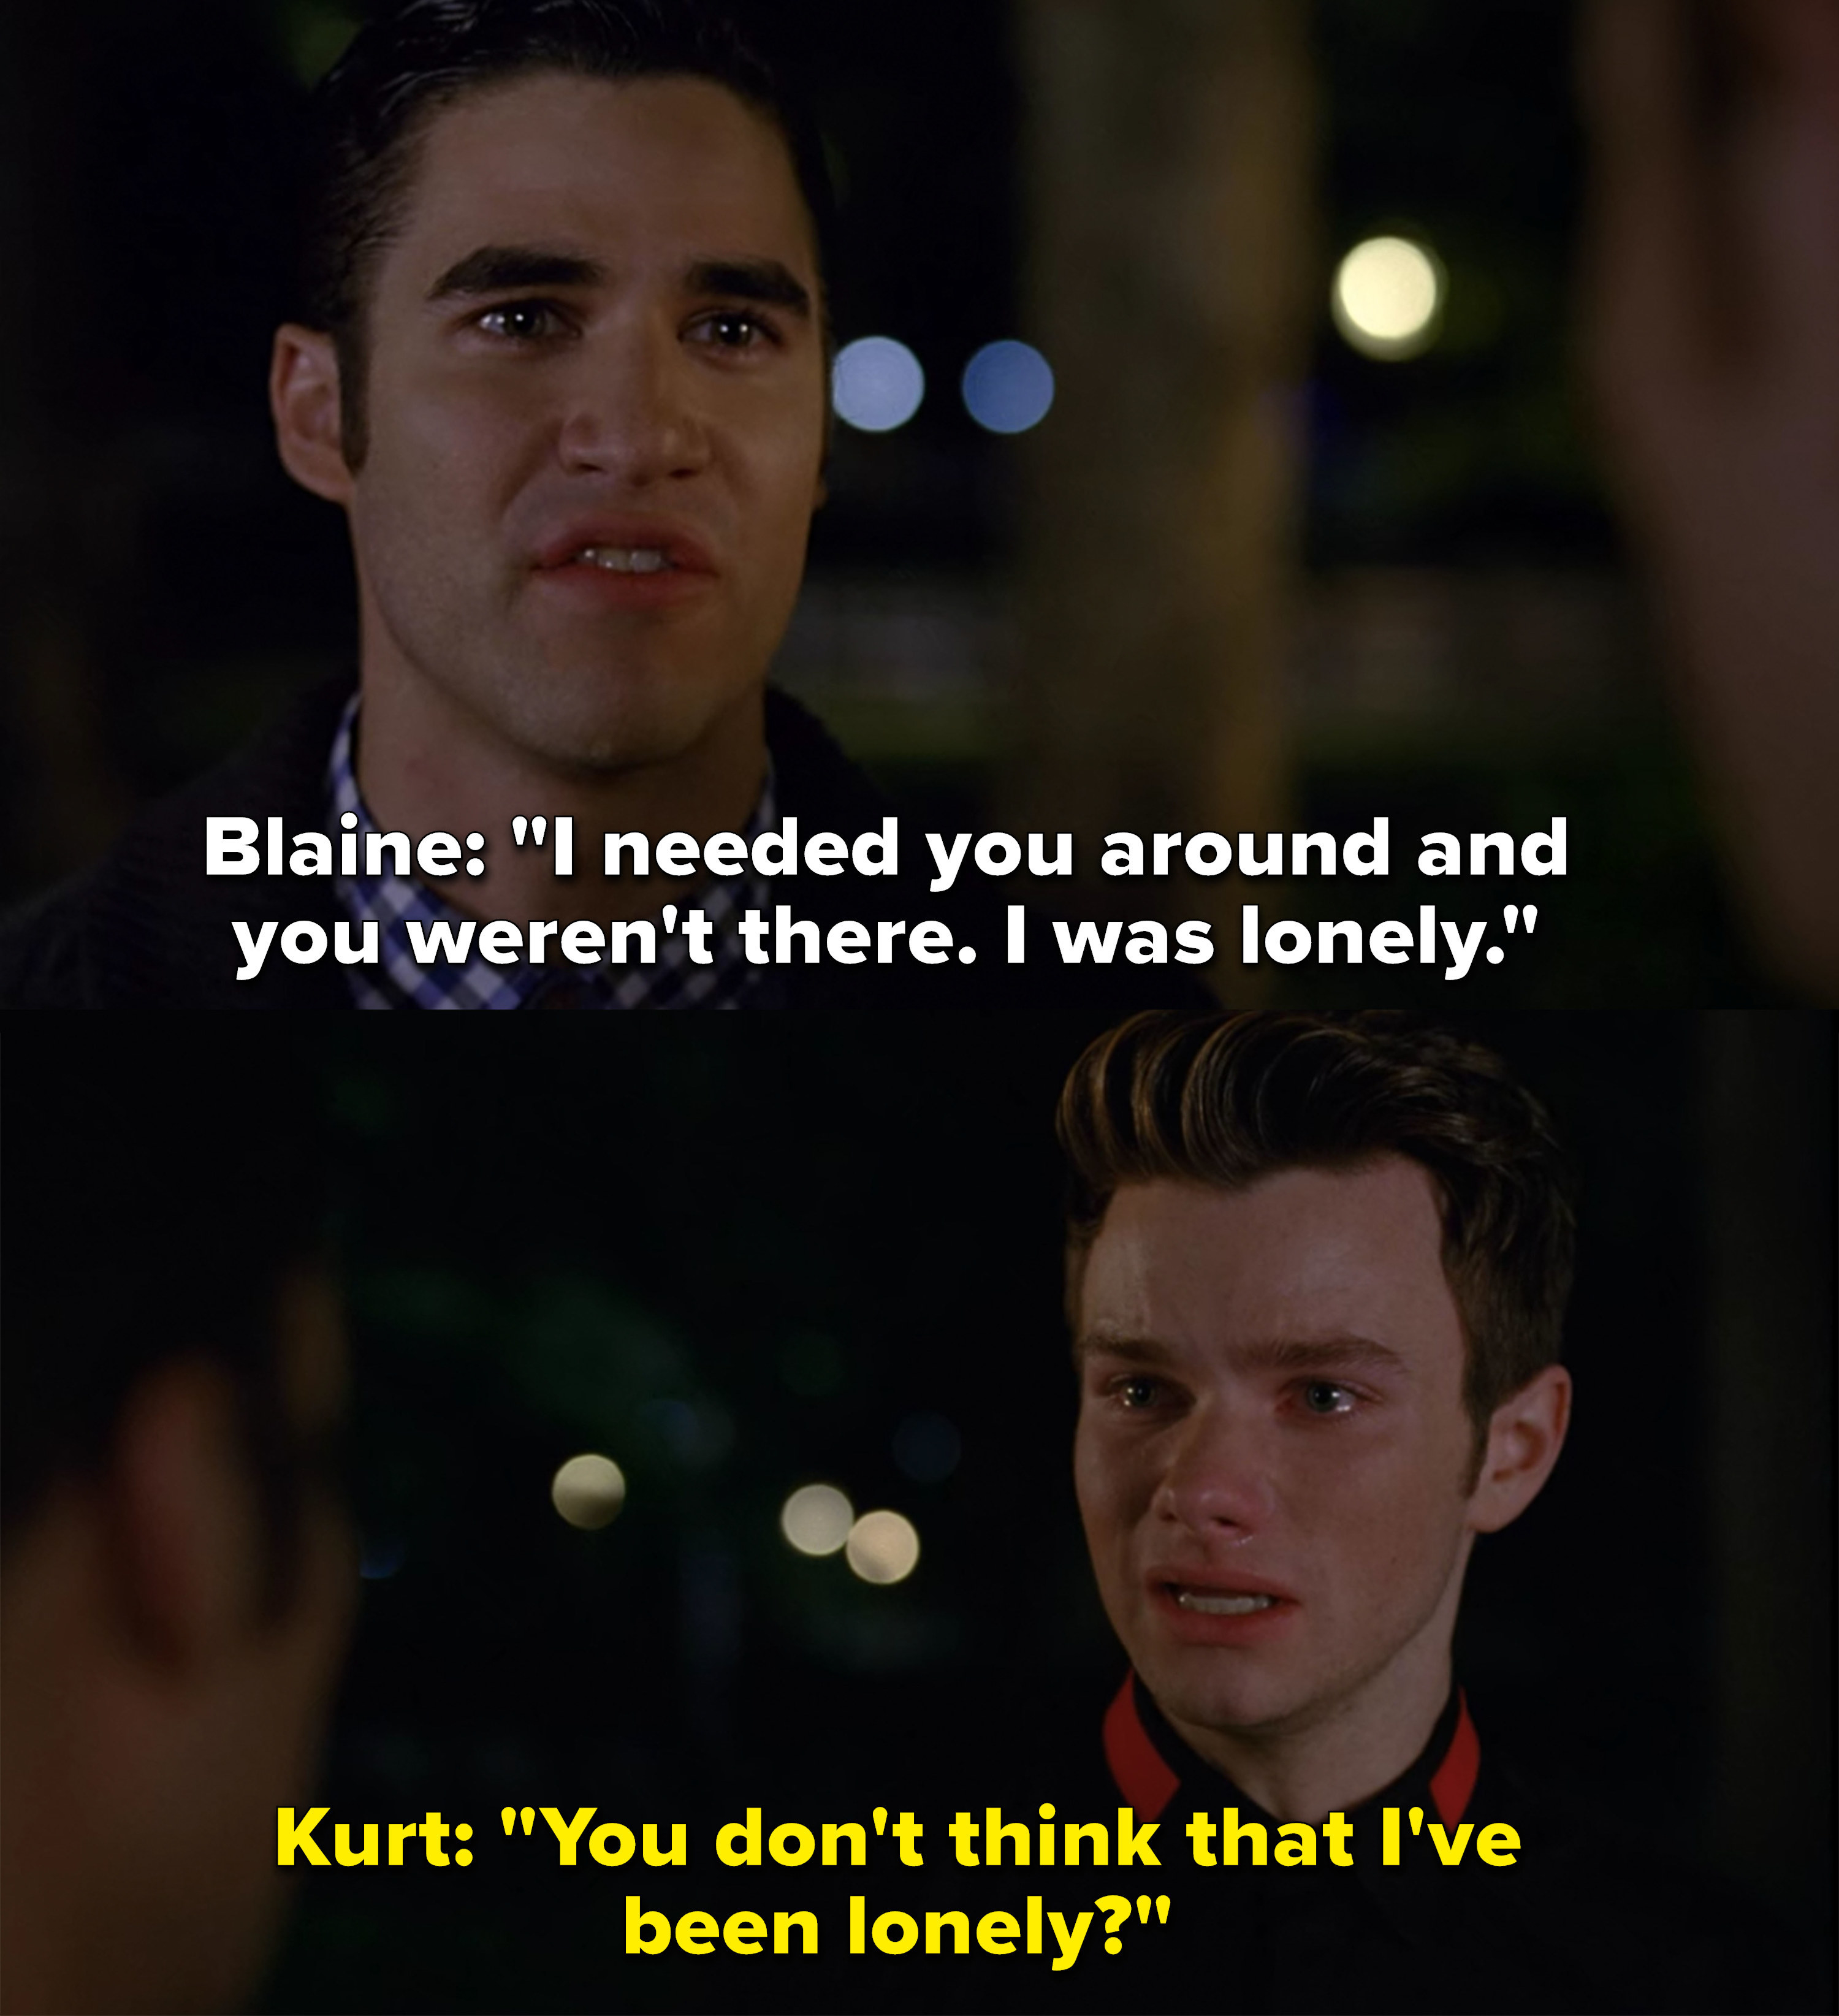 blaine telling kurt that he was lonely as an excuse for cheating